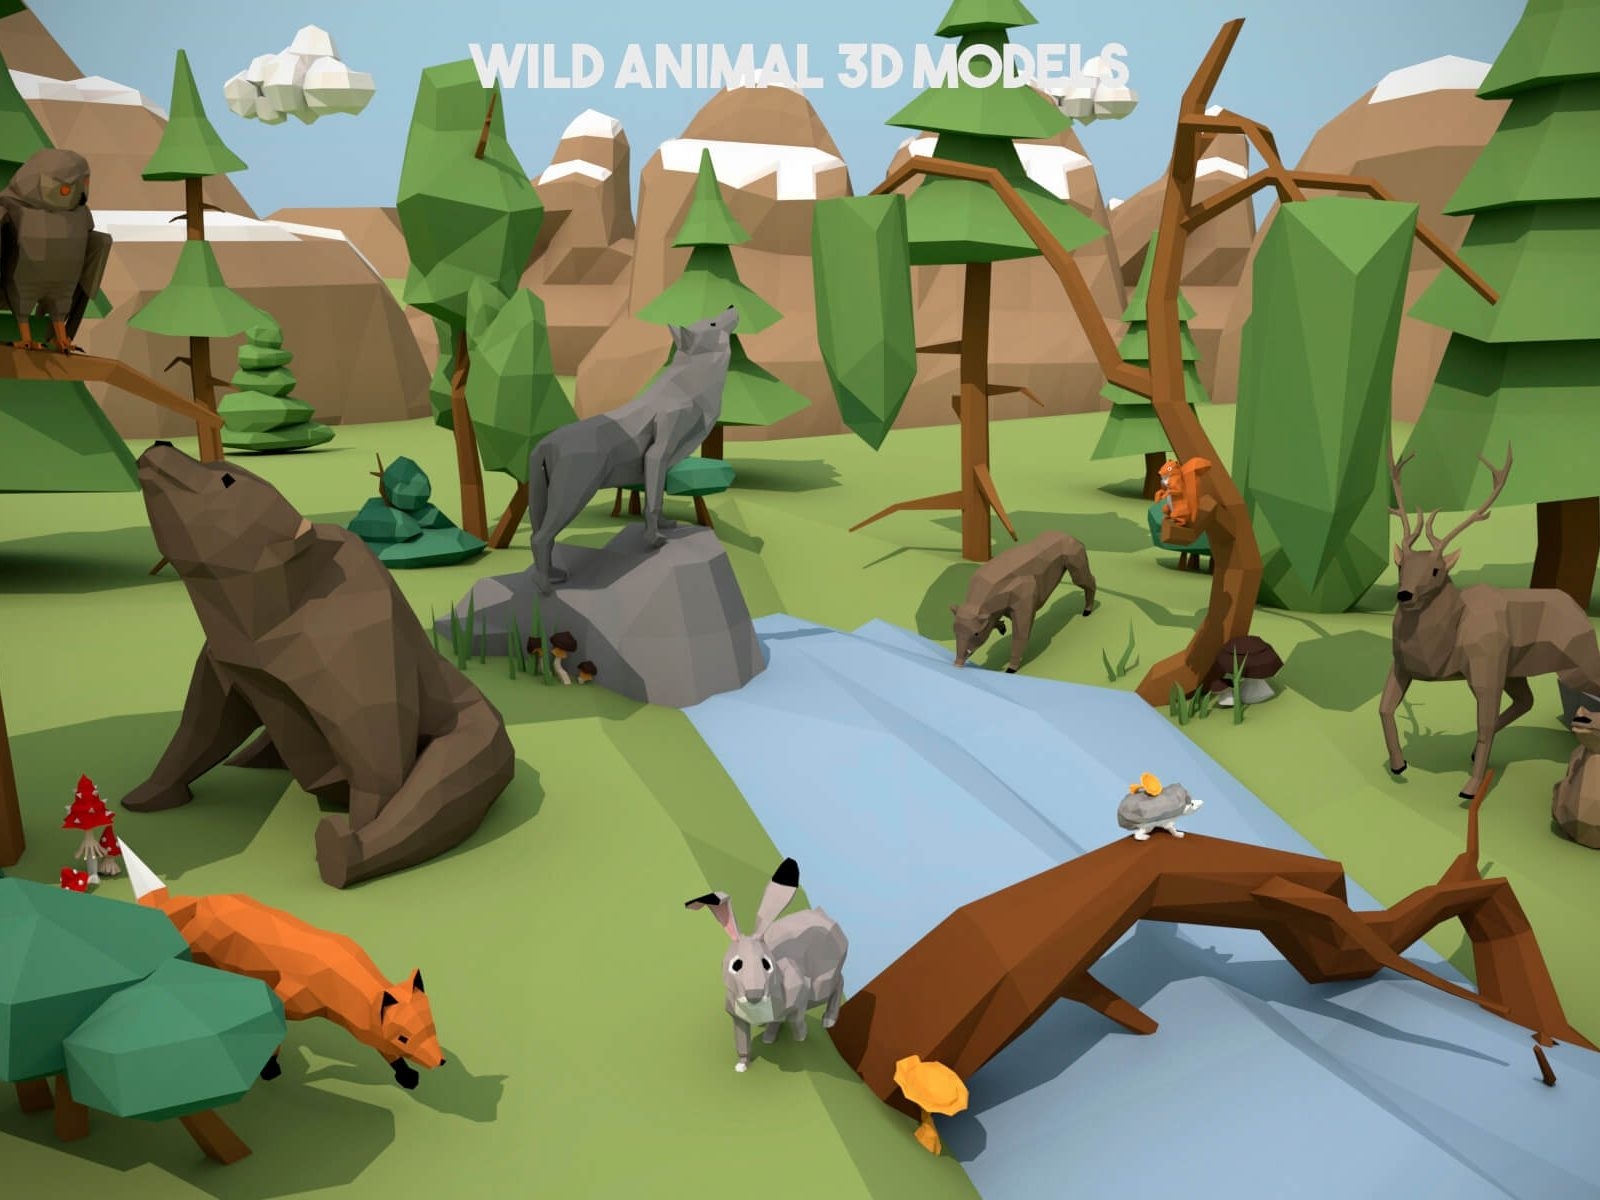 Free Wild Animal 3D Low Poly Models by 2D Game Assets on Dribbble